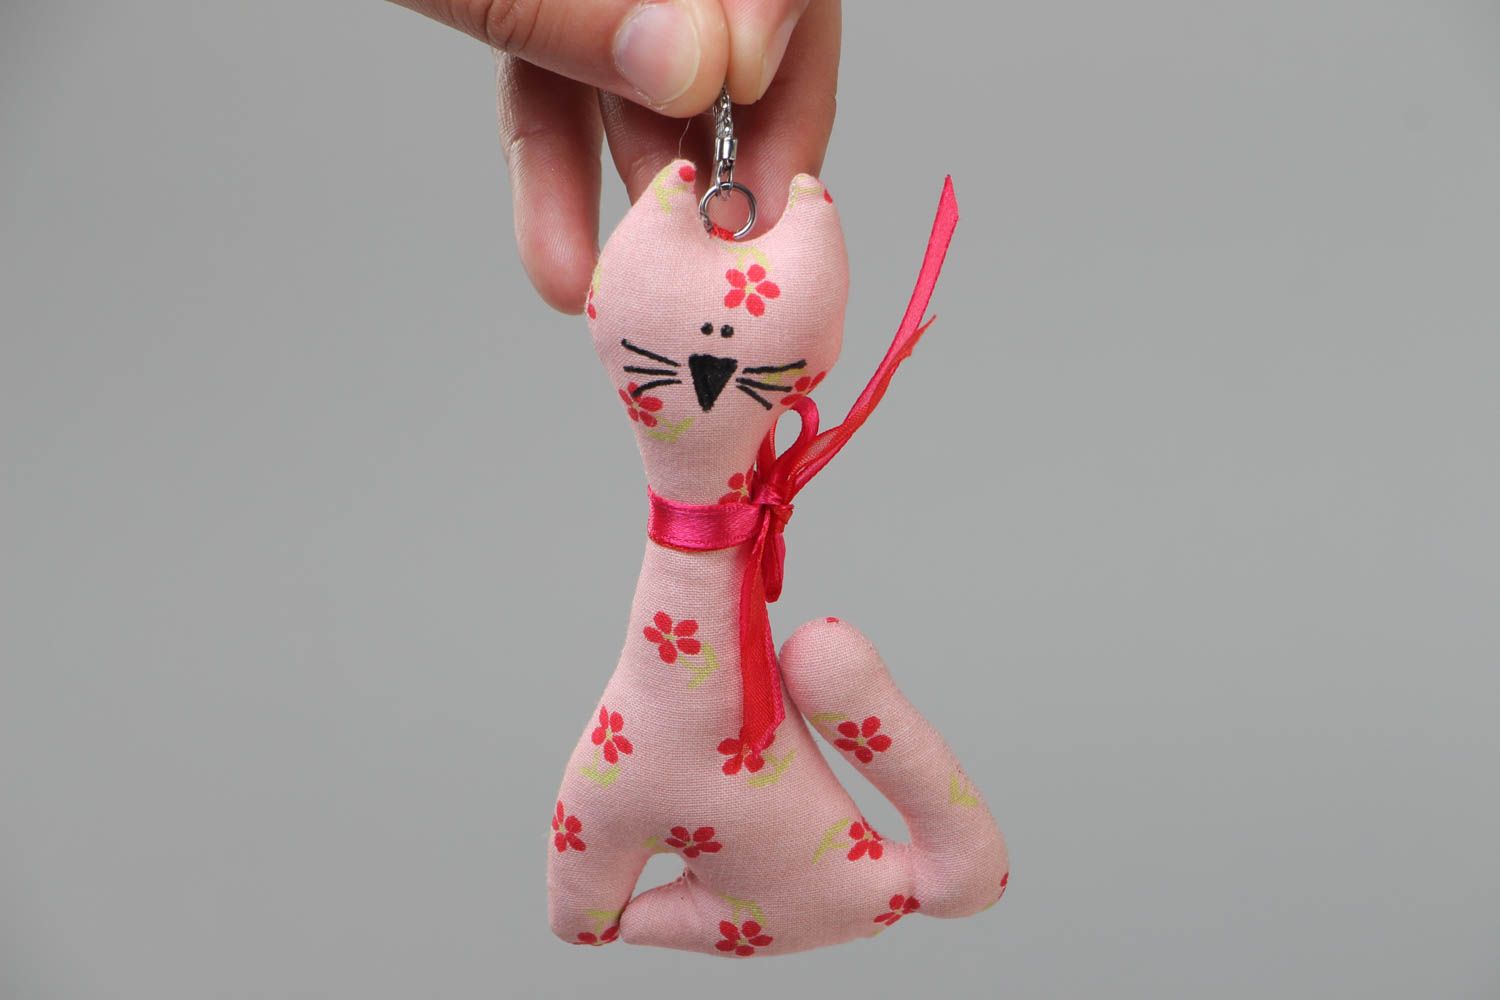 Handmade soft toy keychain sewn of pink polka dot cotton fabric in the shape of cat photo 5